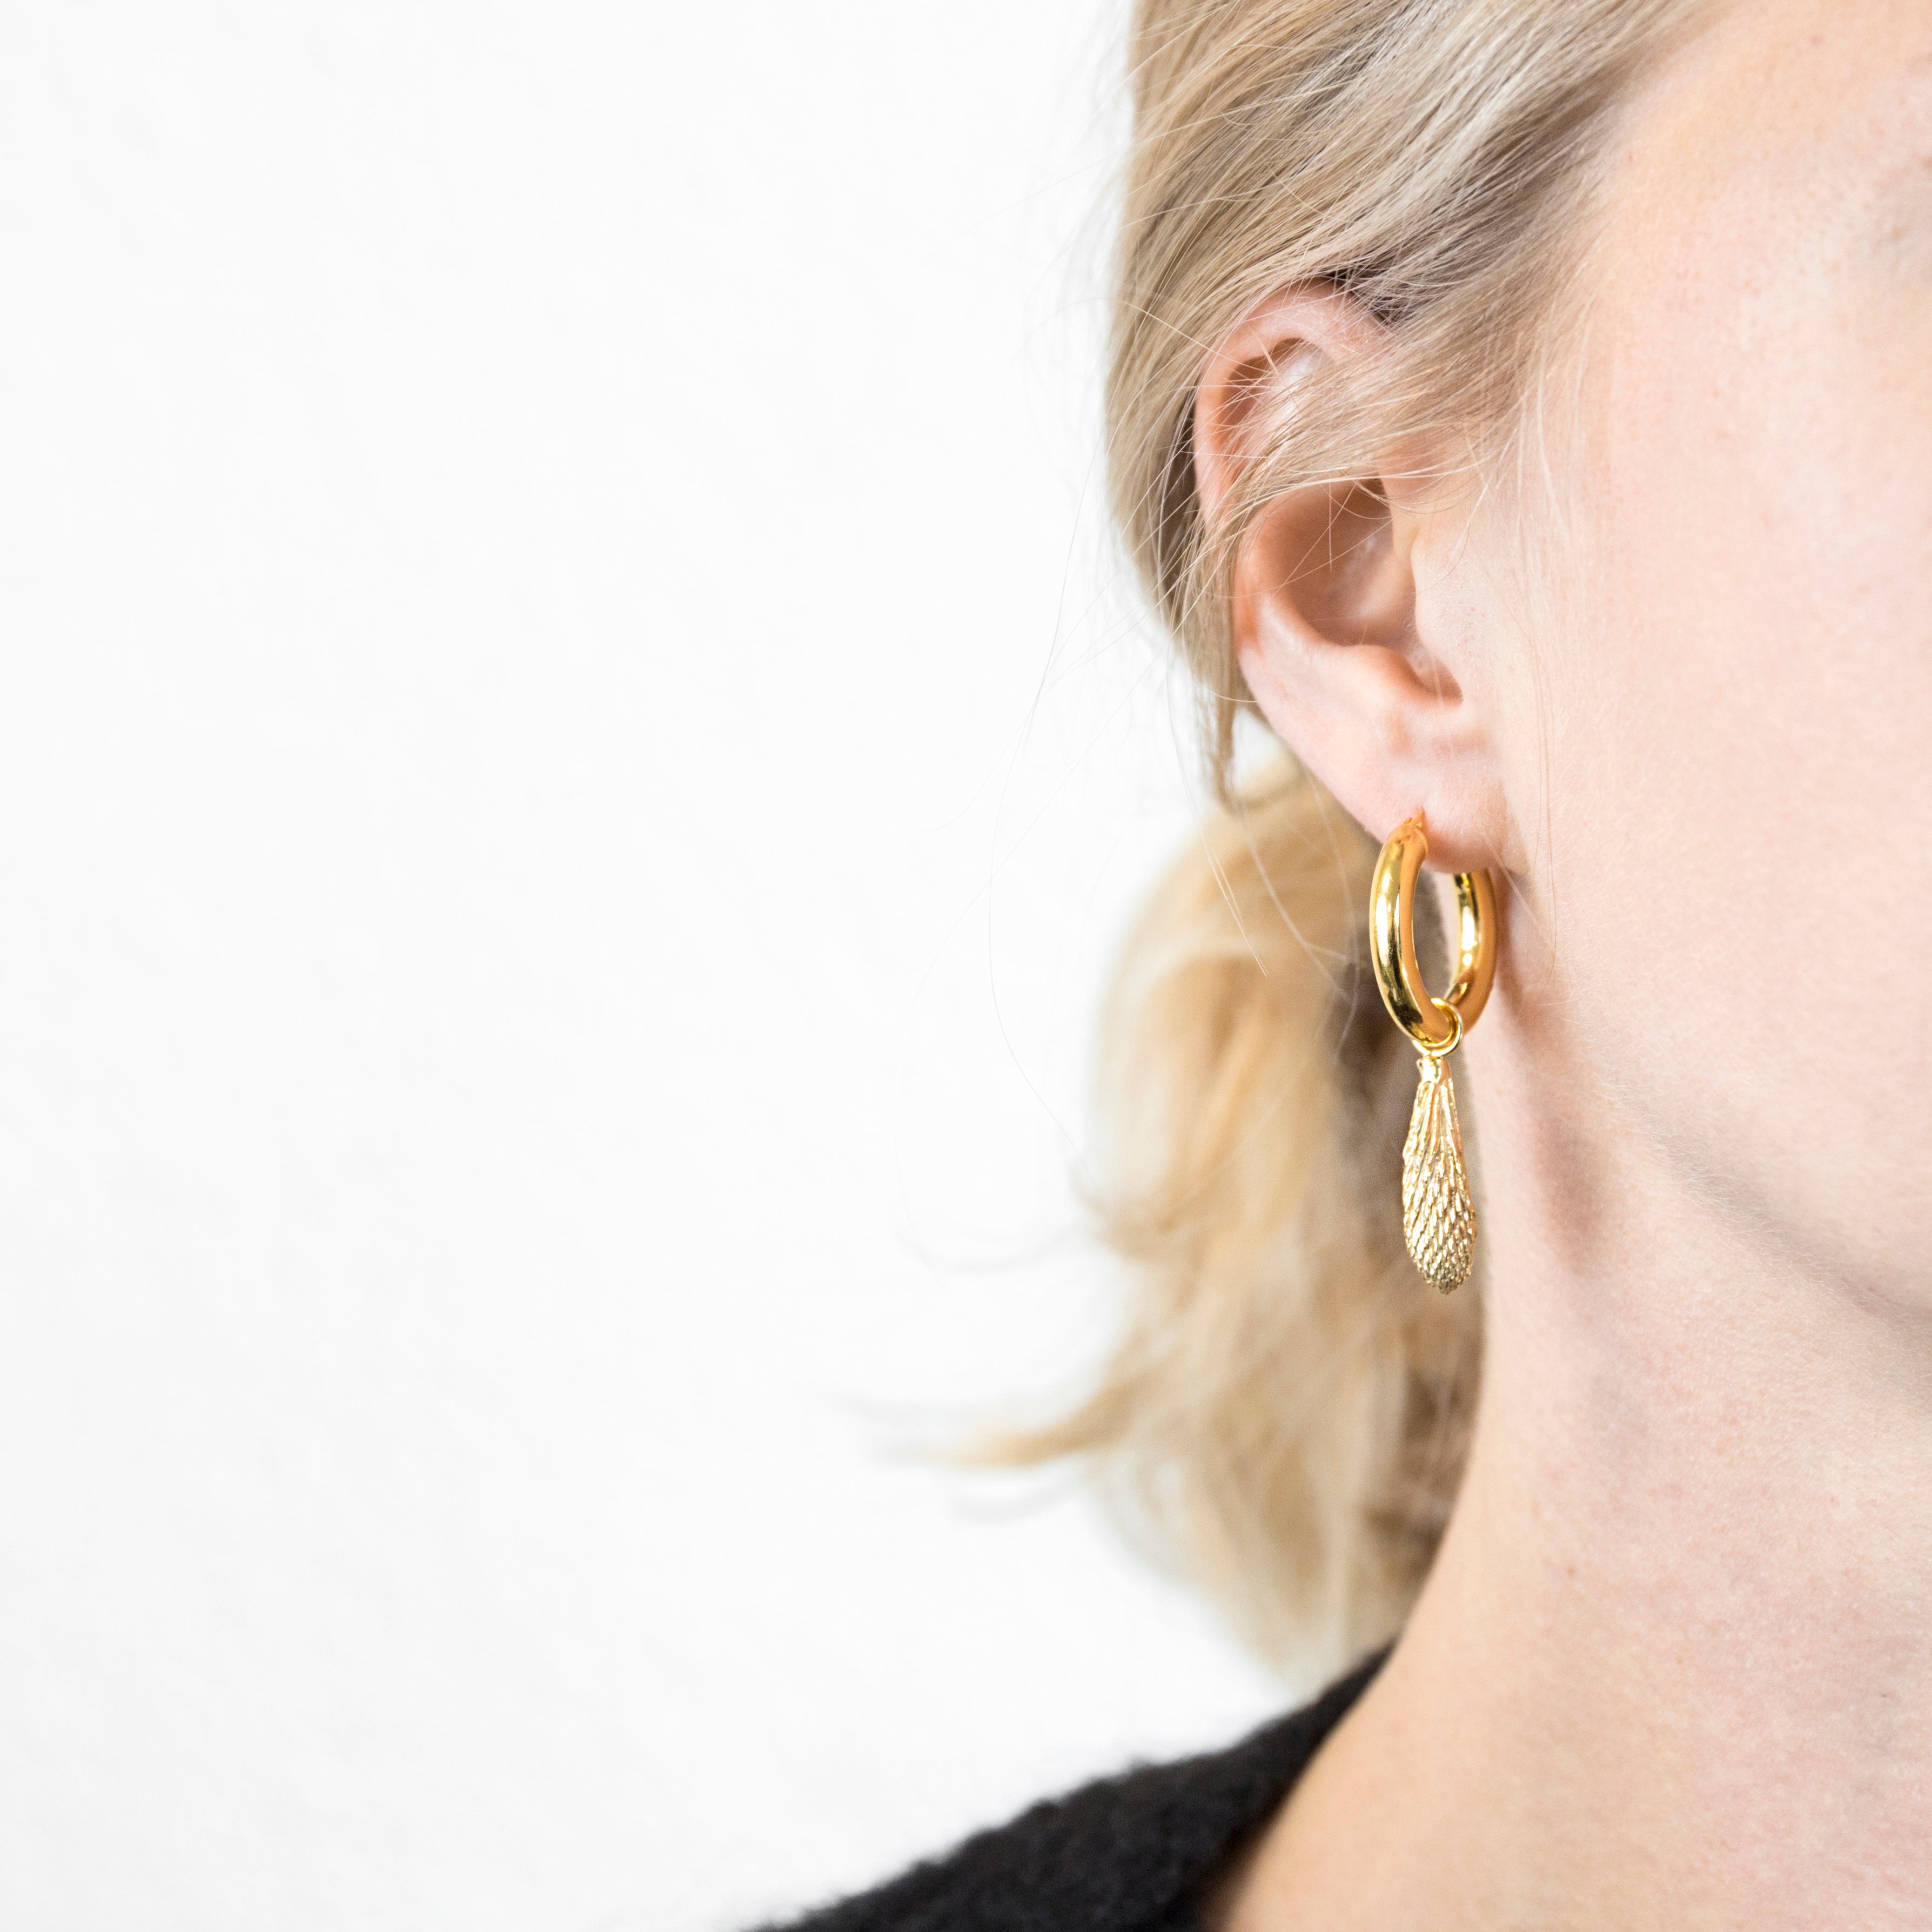 Round gold earrings